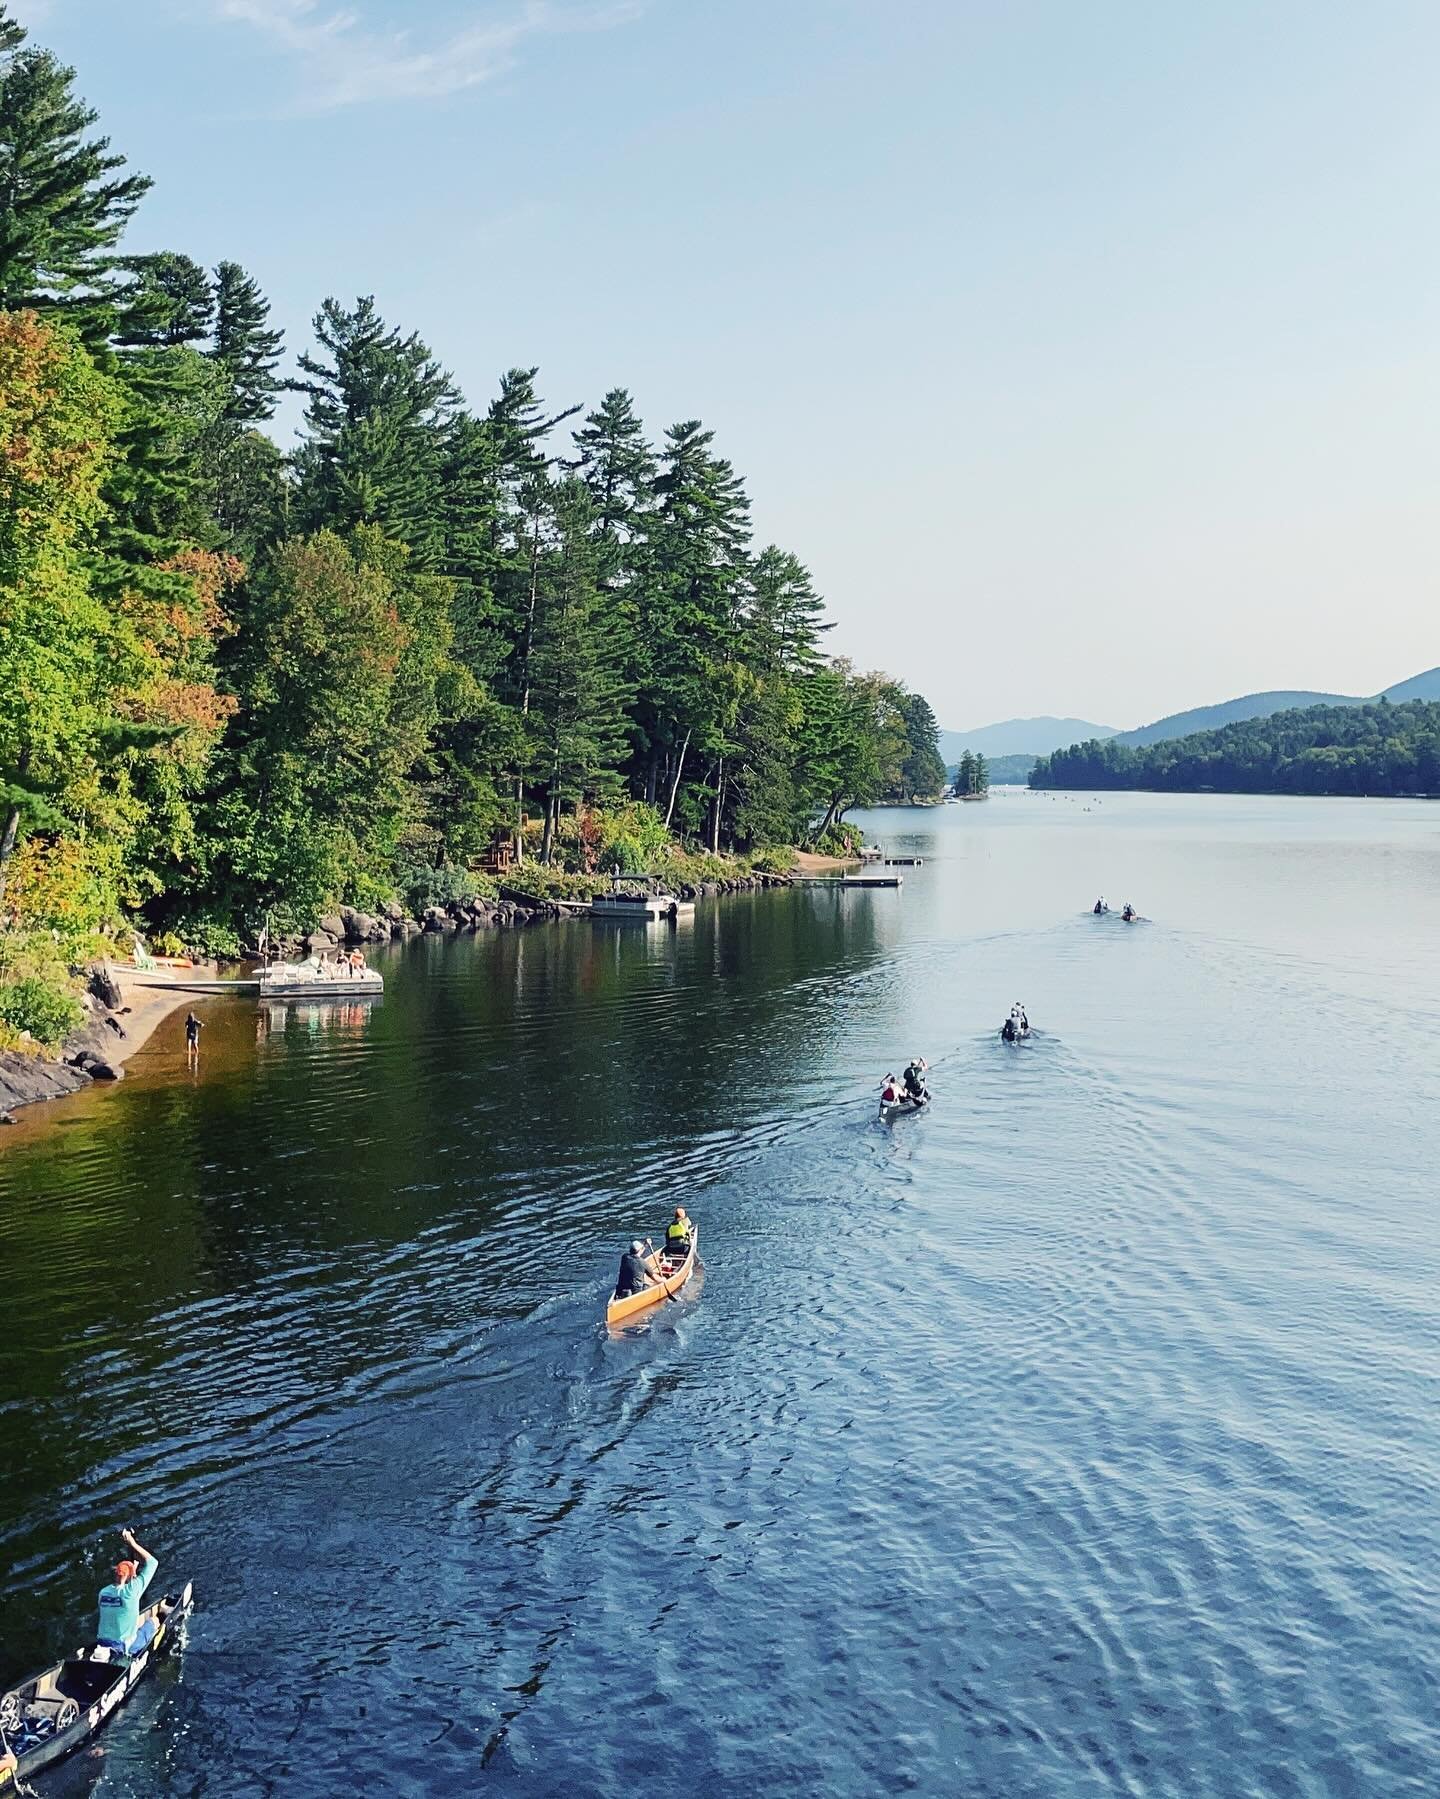 We just got back from a beautiful weekend canoeing up in the Rangeley lakes area and it got me so excited for the Rangeley Oquossoc Adventure Rendezvous (ROAR) happening the last weekend in June, Saturday, June 29 to Sunday, June 30. I wanted to remi